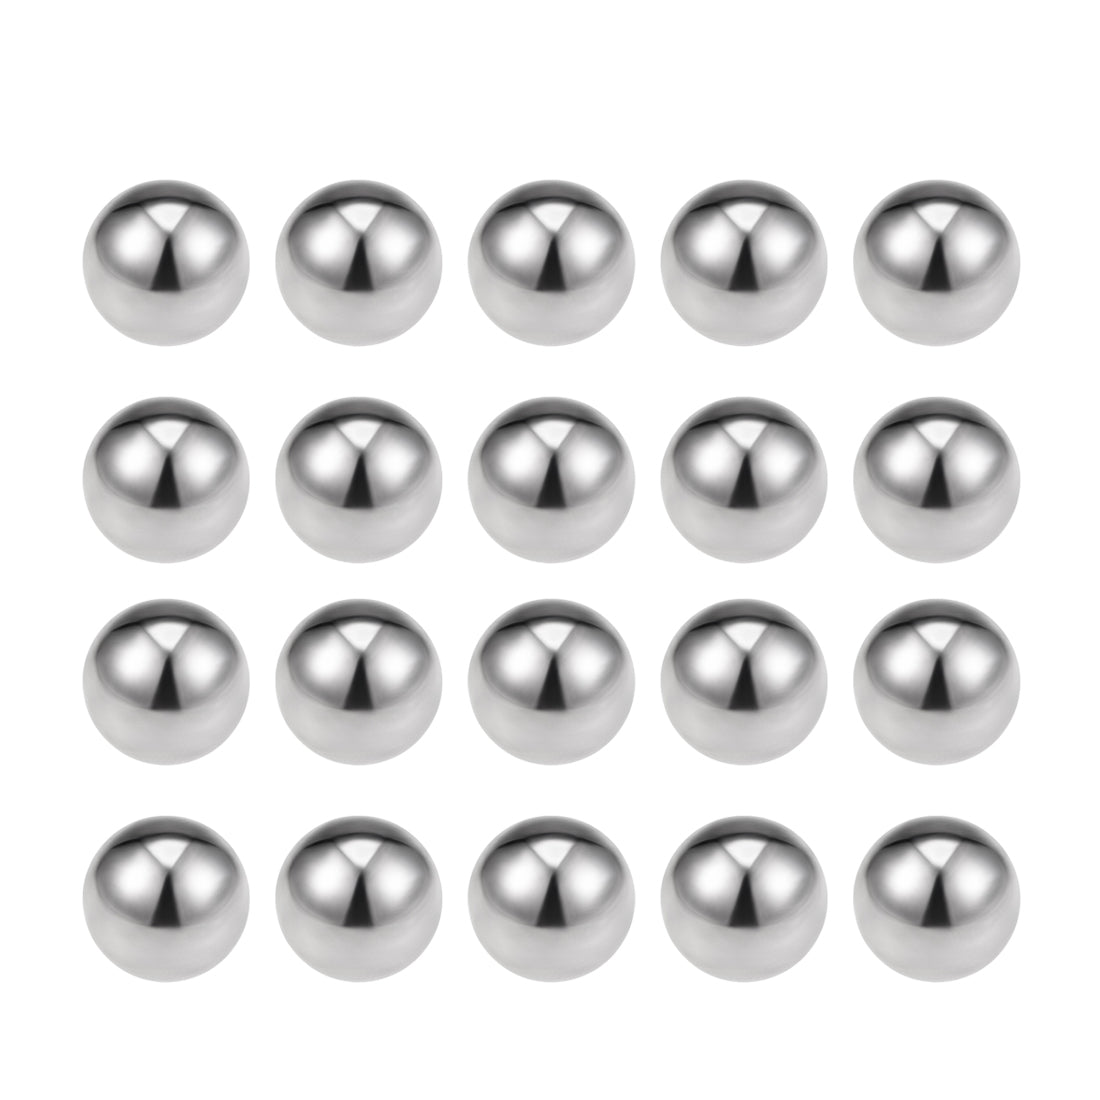 Uxcell Uxcell 1/16" Bearing Balls 440C Stainless Steel G25 Precision Balls 500pcs